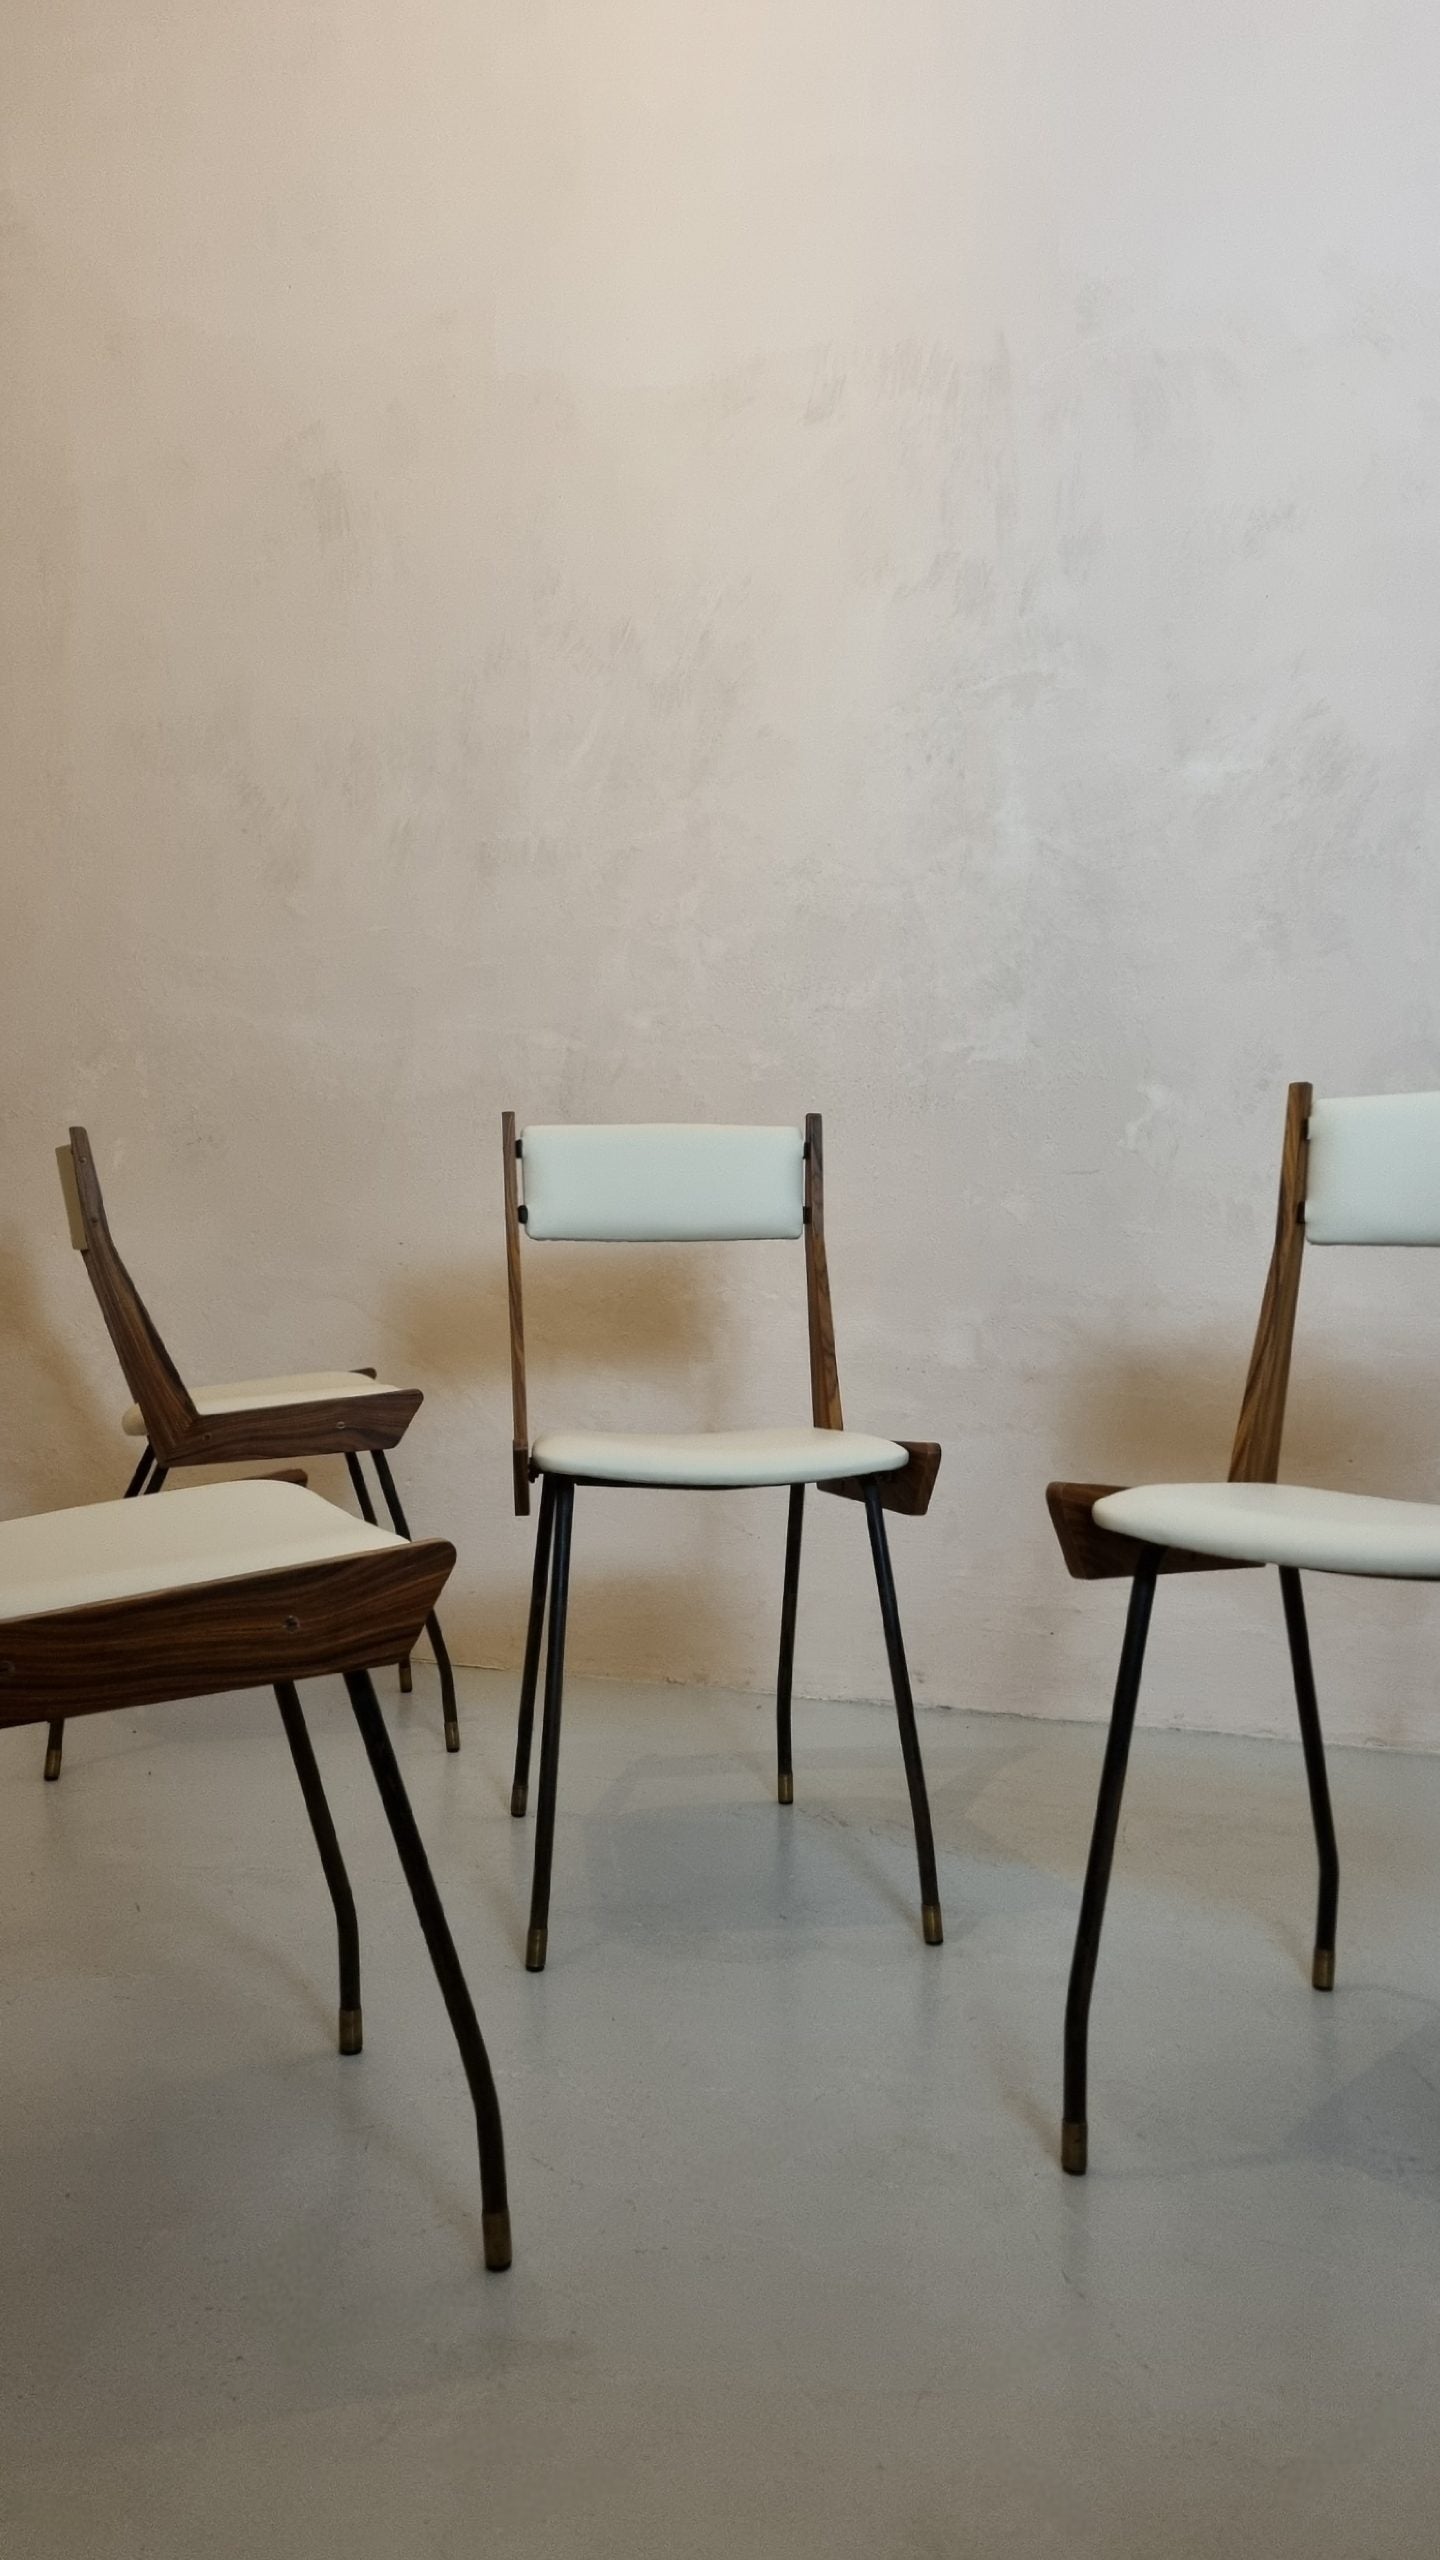 Italian Chairs by Carlo Ratti (Set of 6) Chairs Vintage